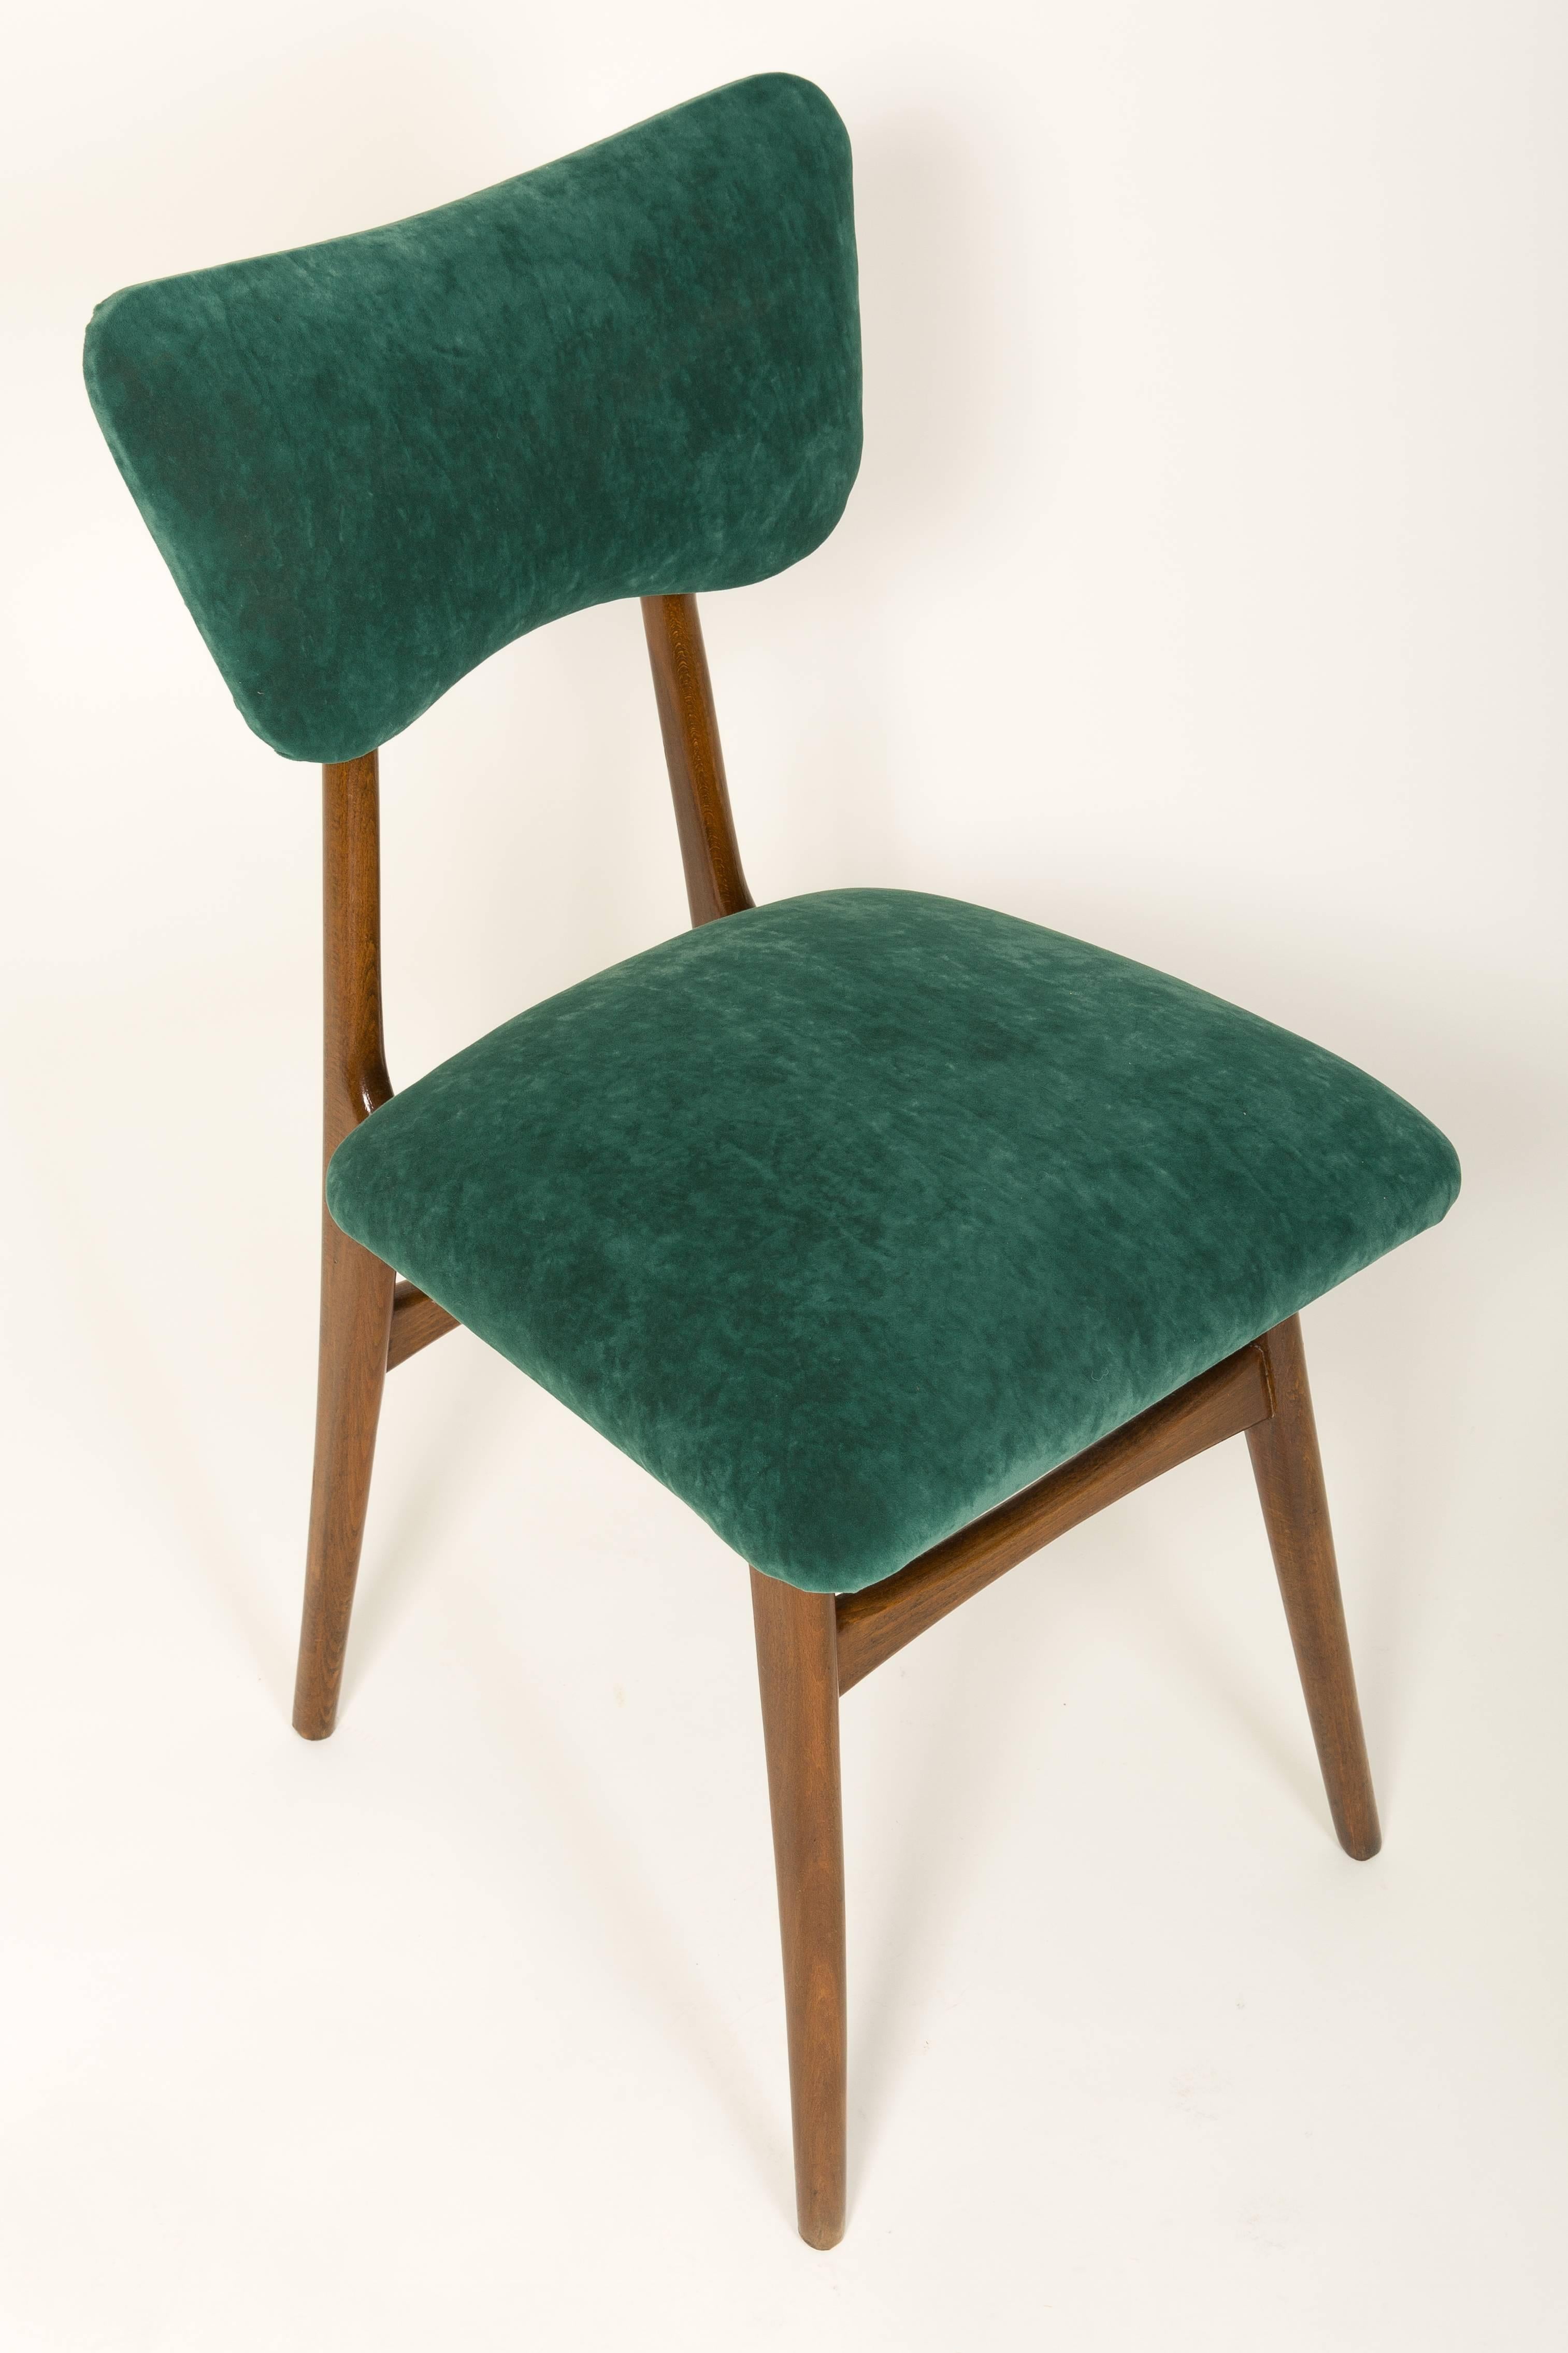 Chair designed by prof. Rajmund Halas. Made of beech wood. Chair is after a complete upholstery renovation, the woodwork has been refreshed. Seat and back is dressed in a dark green, durable and pleasant to the touch velvet fabric. Chair is stable